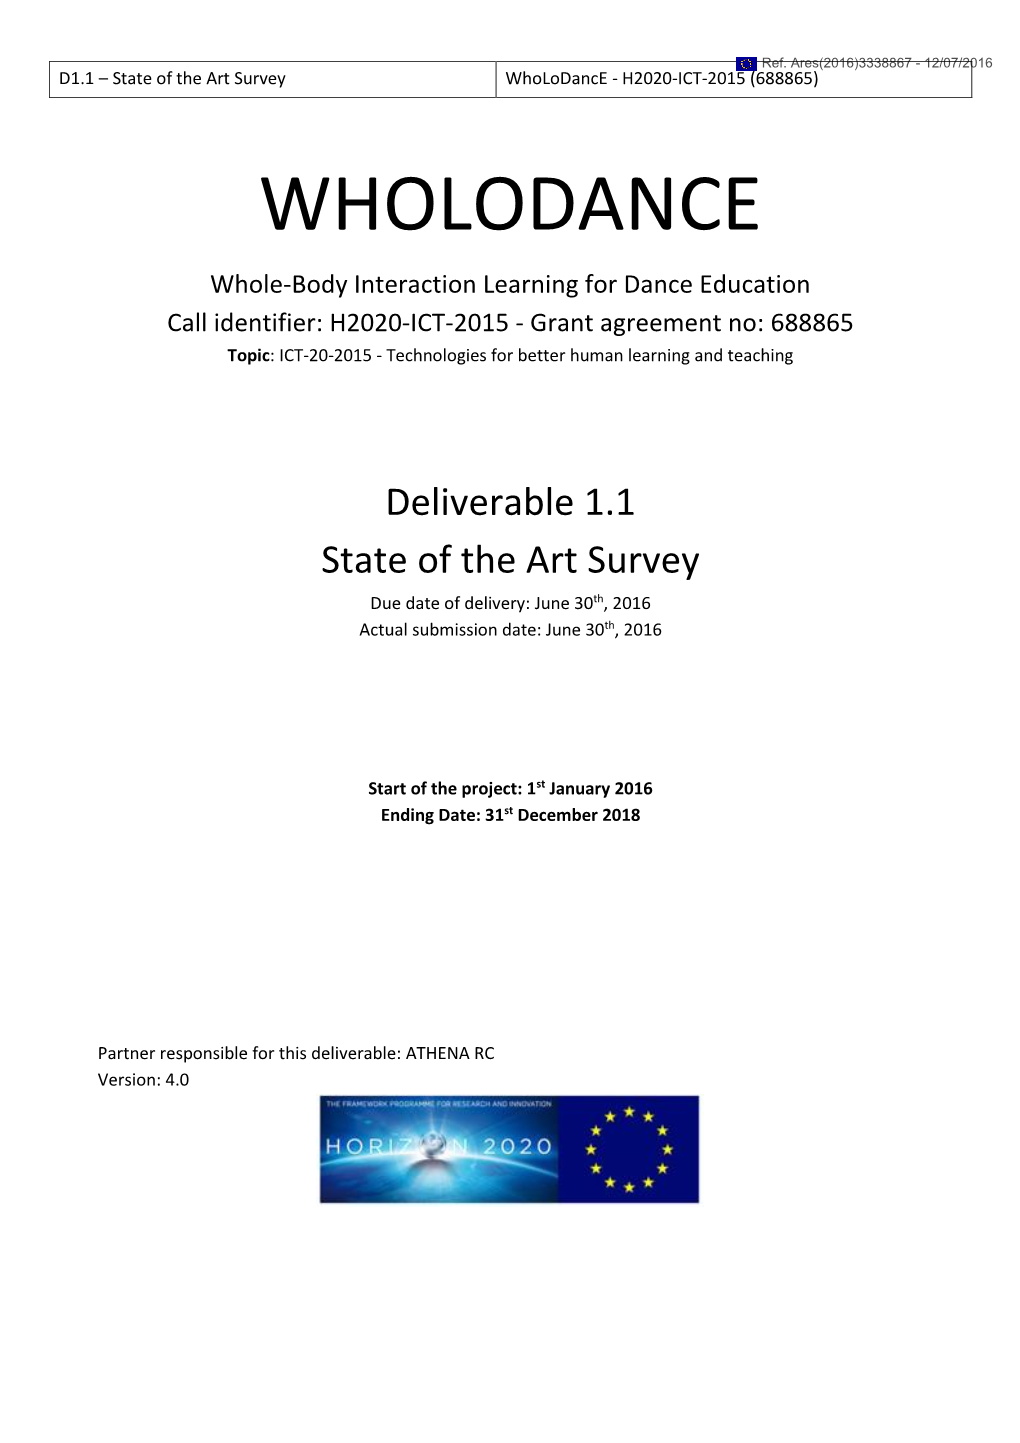 State of the Art Survey Wholodance - H2020-ICT-2015 (688865)